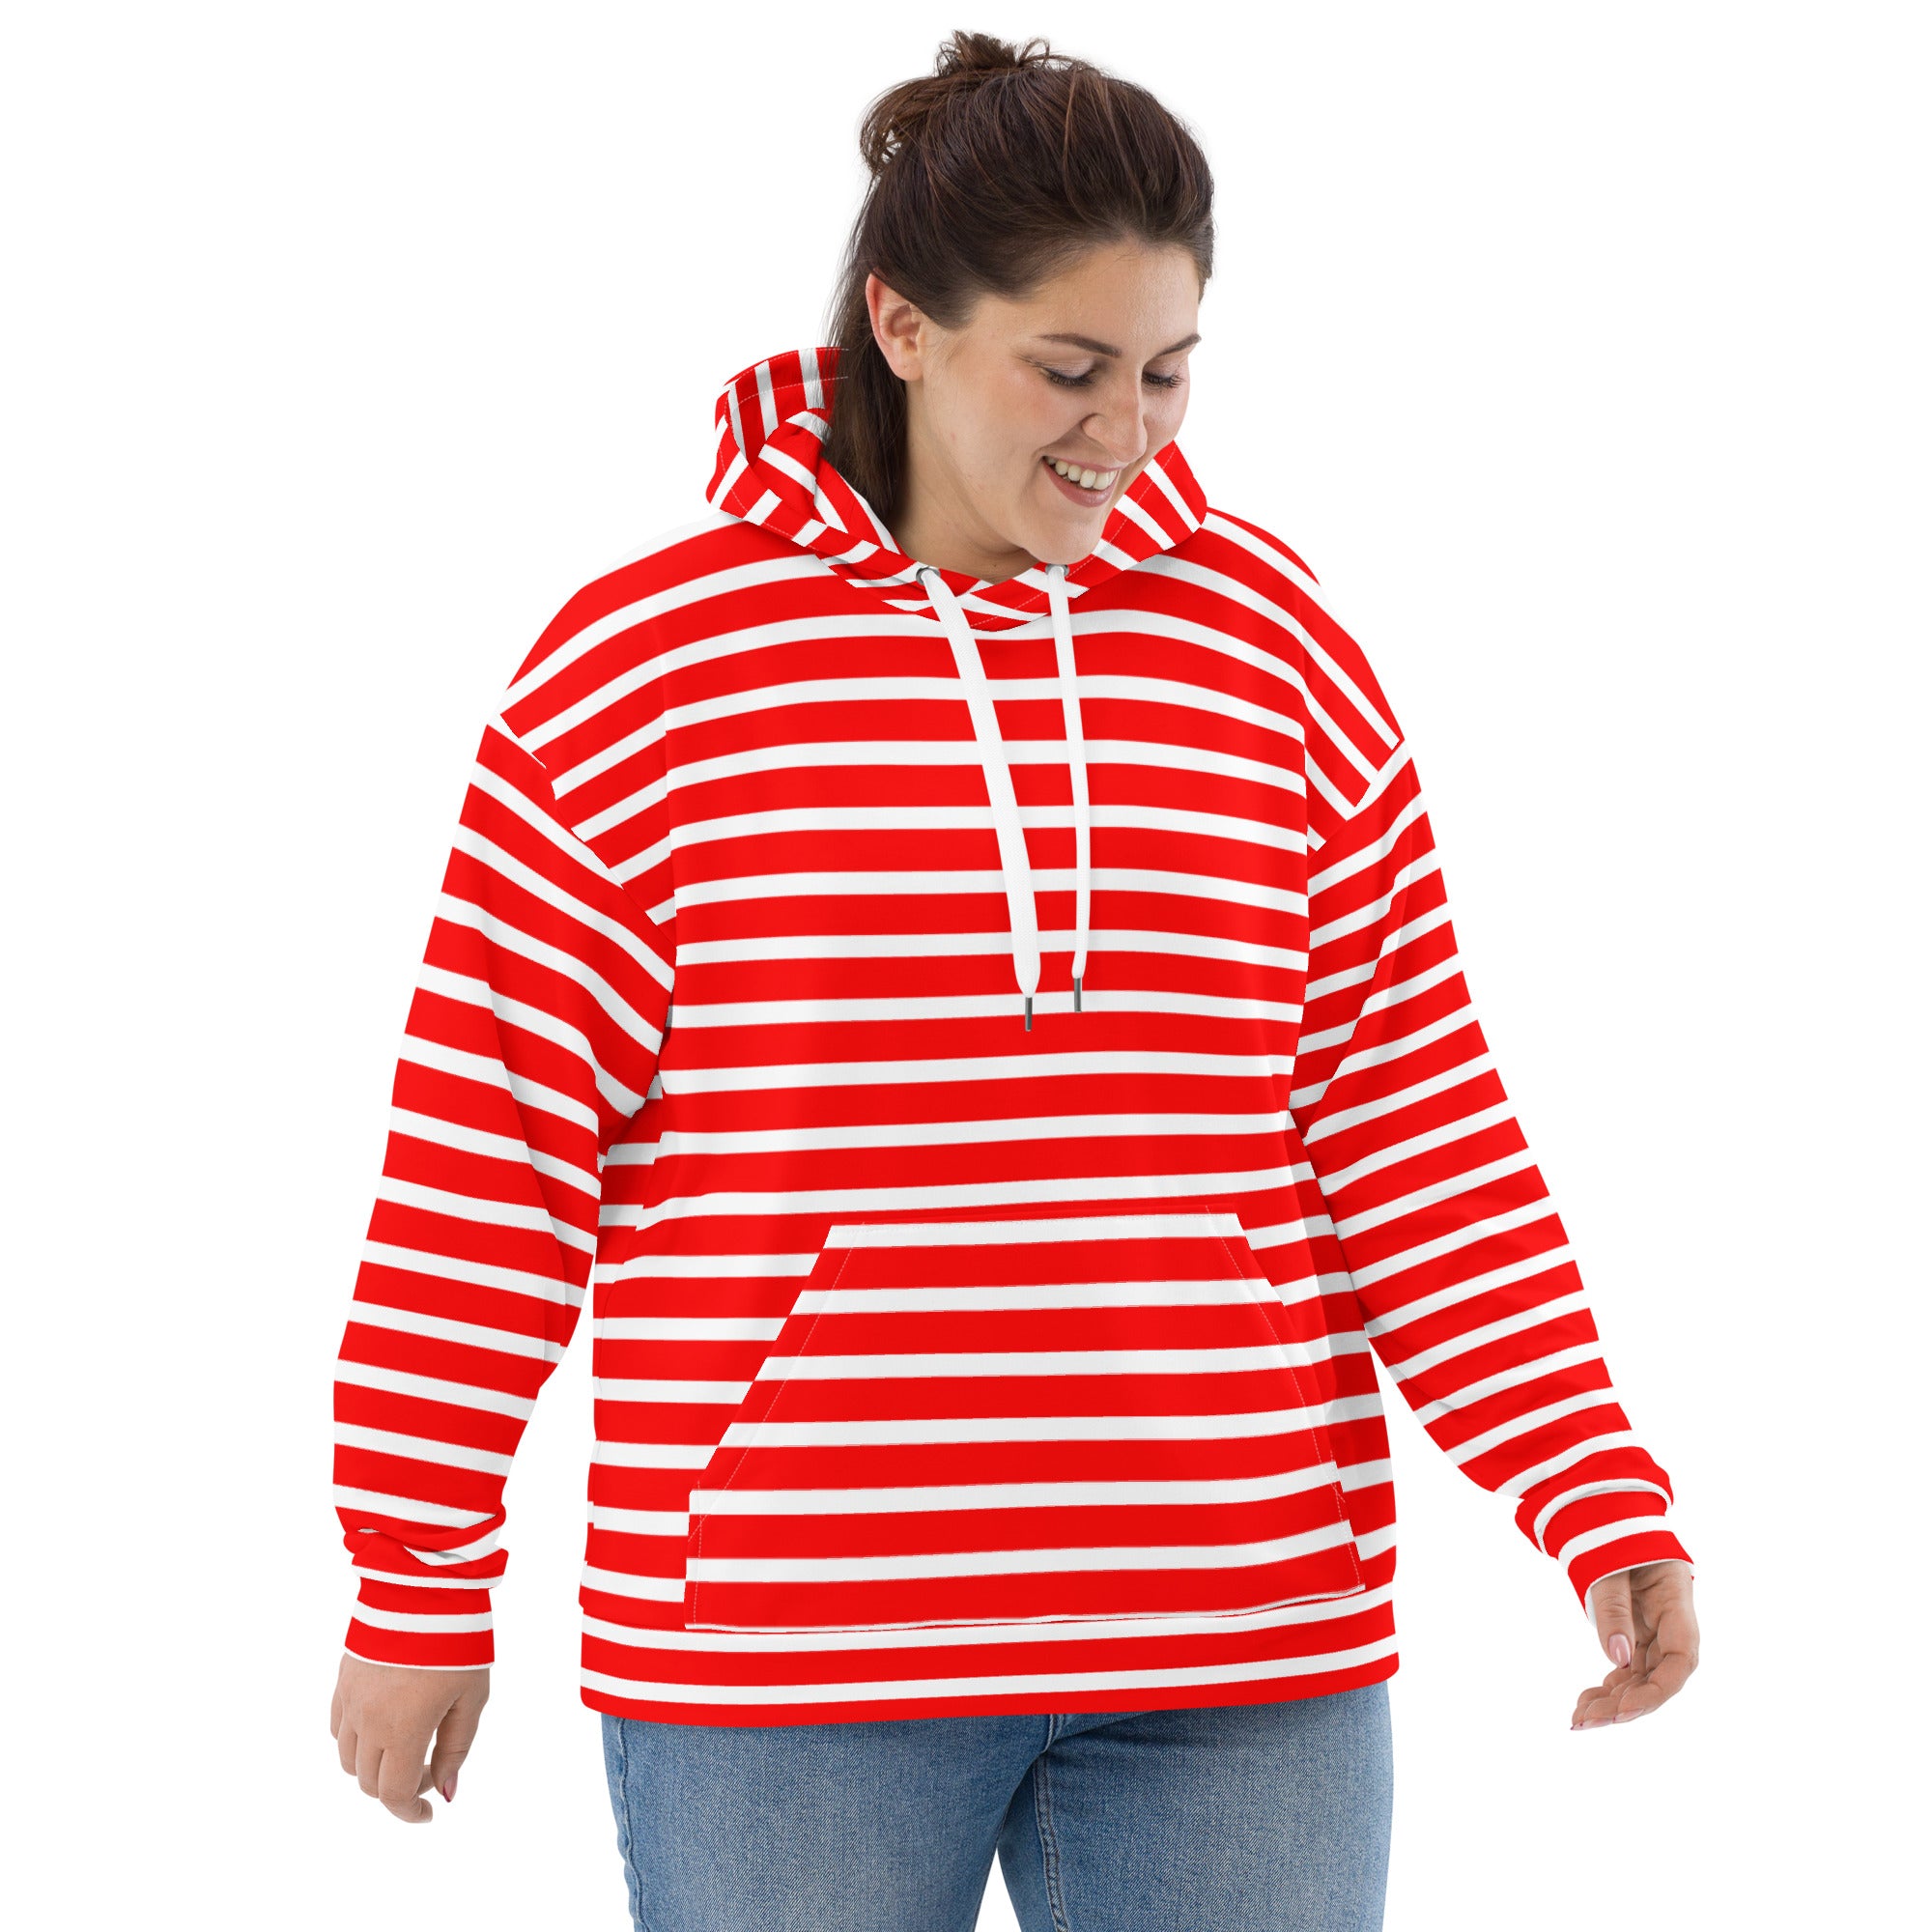 Unisex Hoodie- White and Red Striped